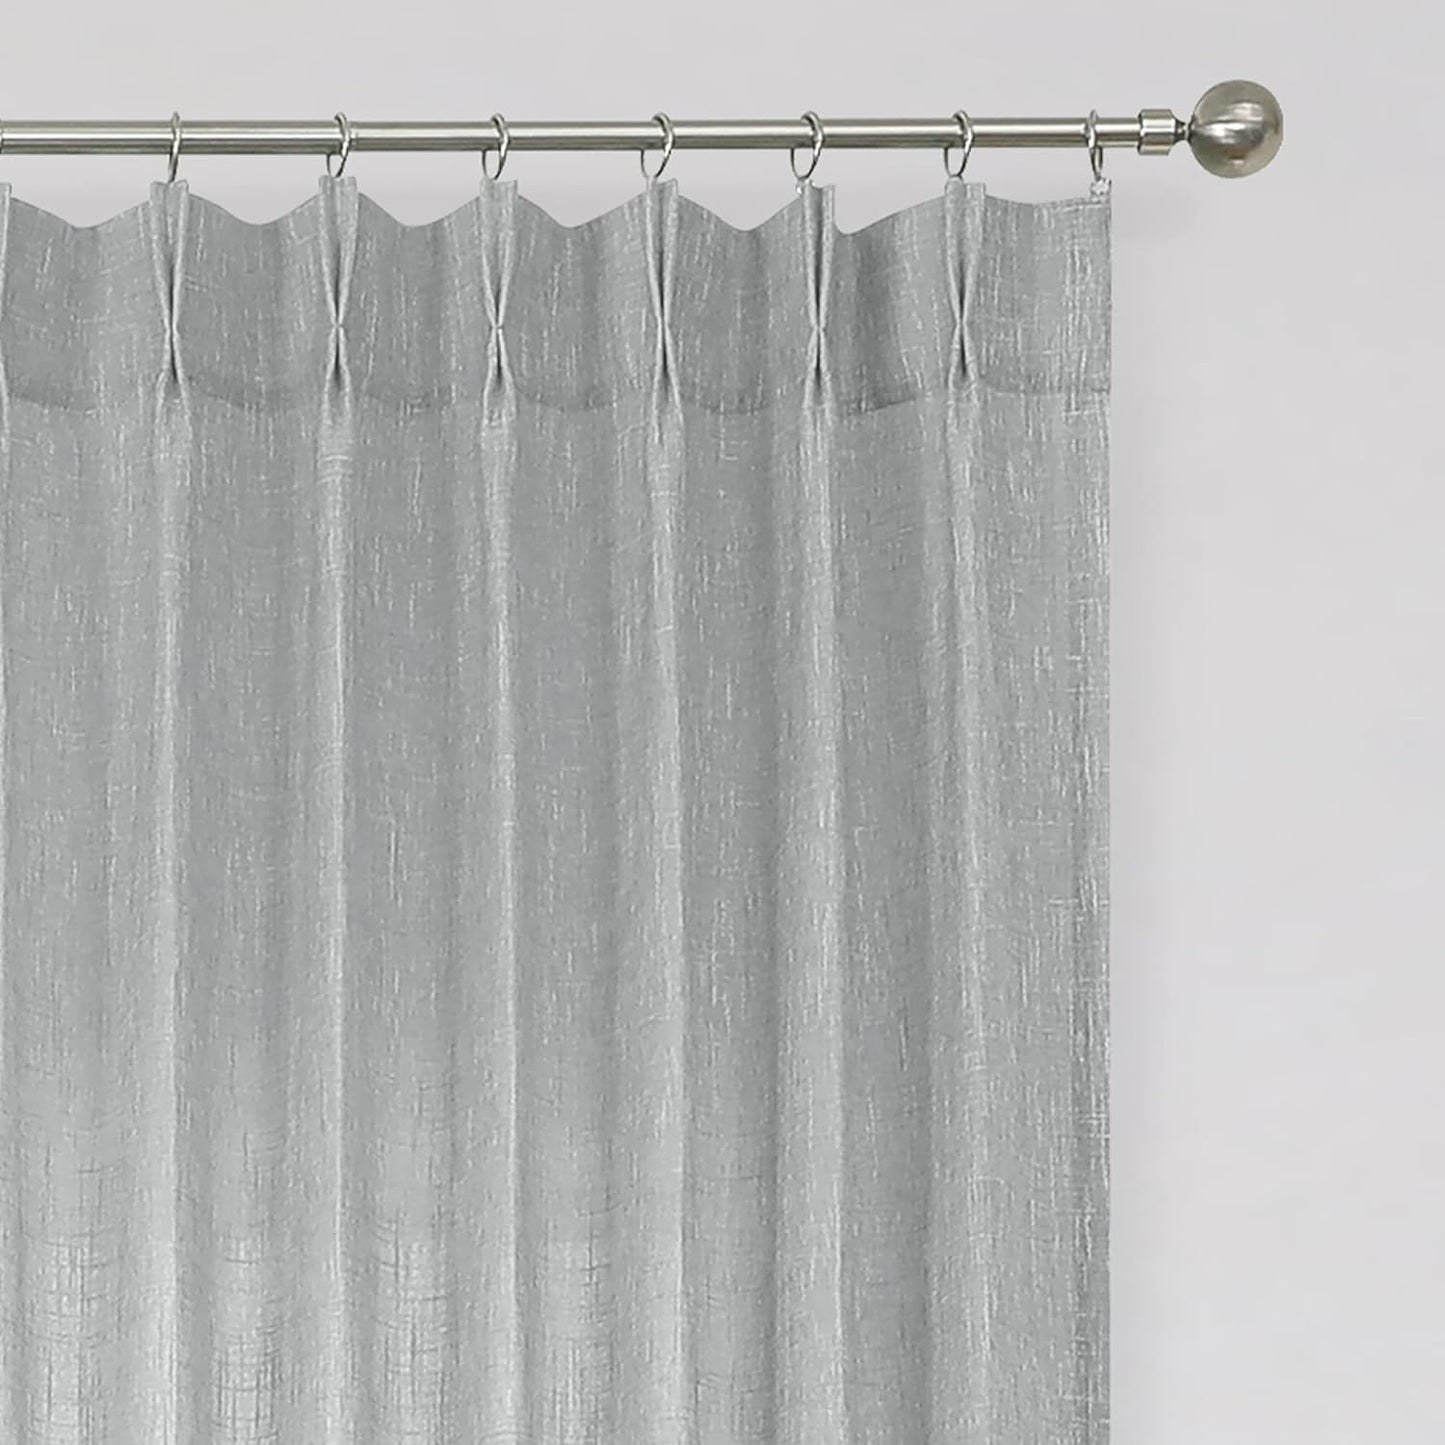 Vision Home Natural Pinch Pleated Semi Sheer Curtains Textured Linen Blended Light Filtering Window Curtains 84 Inch for Living Room Bedroom Pinch Pleat Drapes with Hooks 2 Panels 42" Wx84 L  Vision Home Silver Grey/Pinch 40"X63"X2 